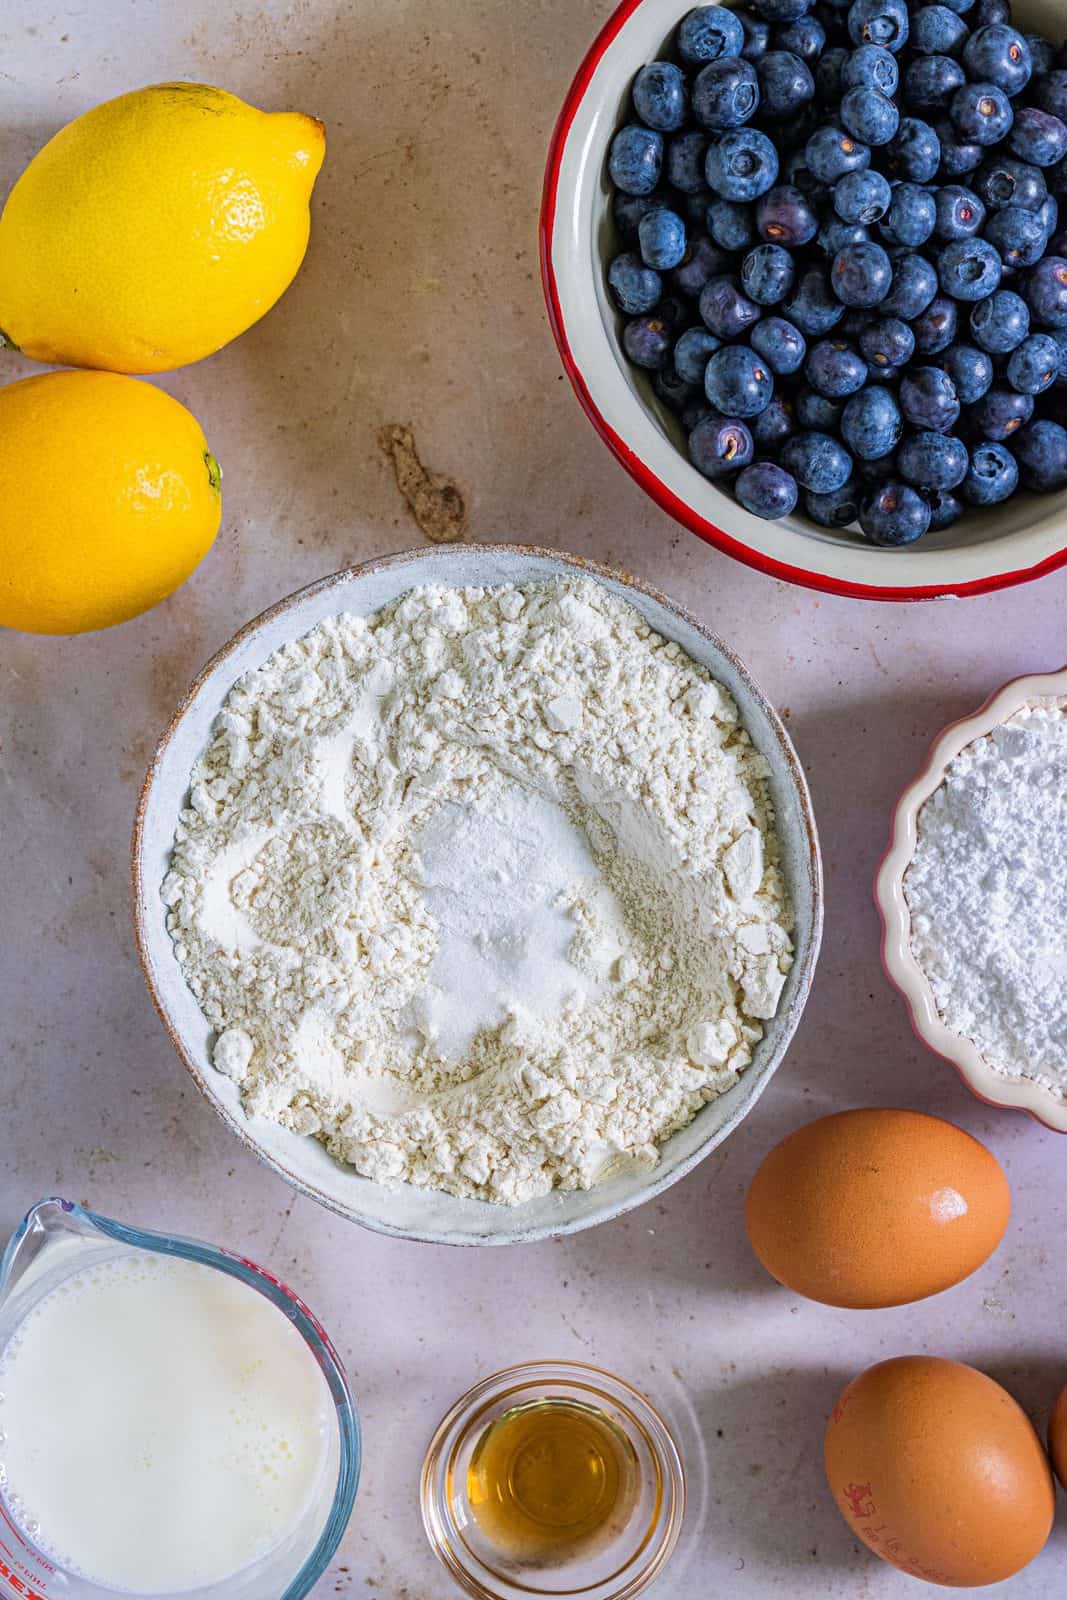 Dry ingredients in white bowl surrounded by fresh blueberries, lemon, eggs and milk.